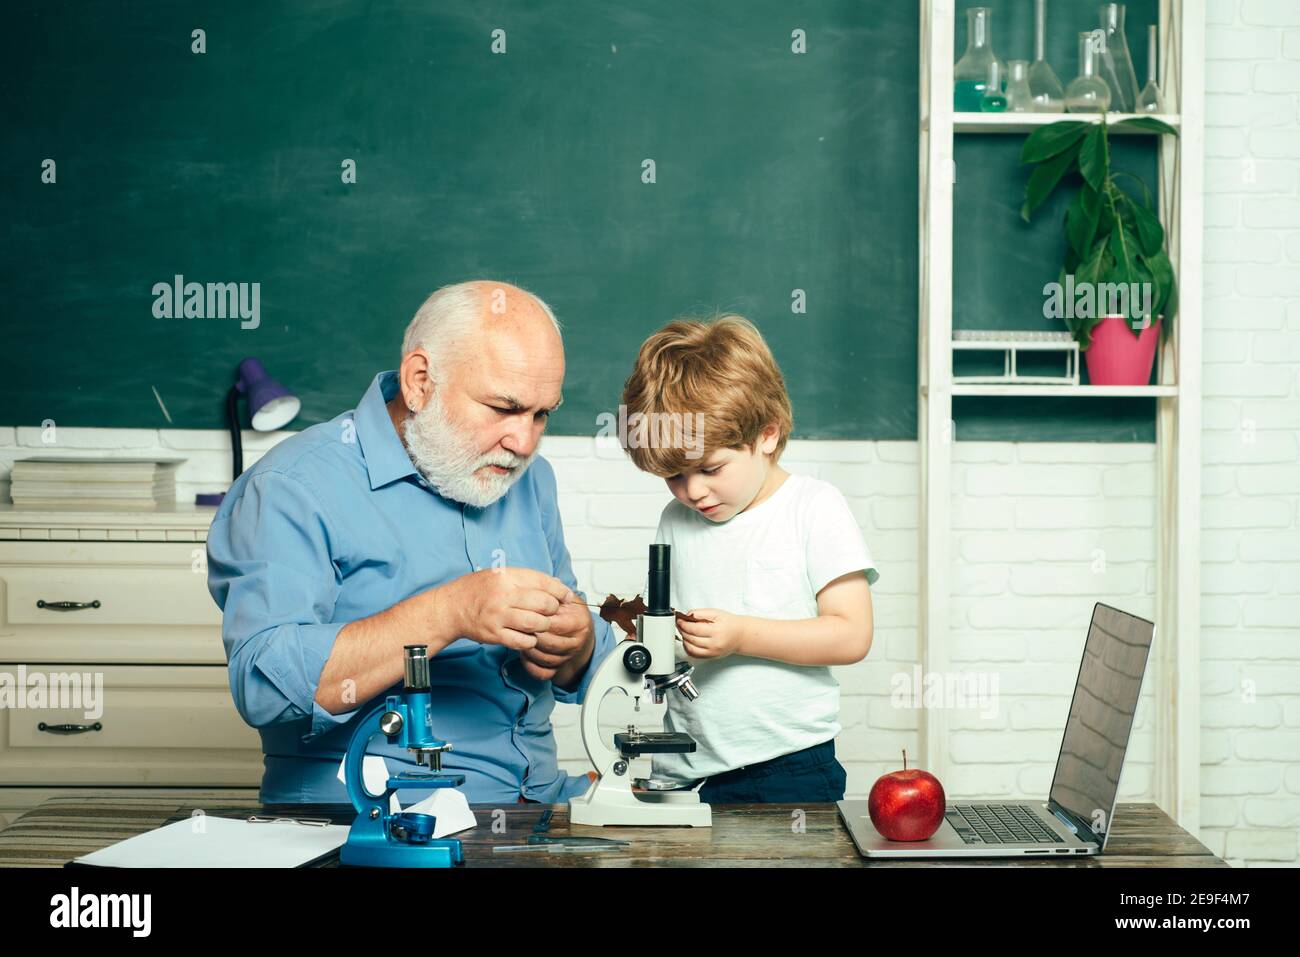 Teacher is skilled leader. Grandfather and grandchild. Concept of a retirement age. Learning and education concept. Grandfather and grandson. Stock Photo